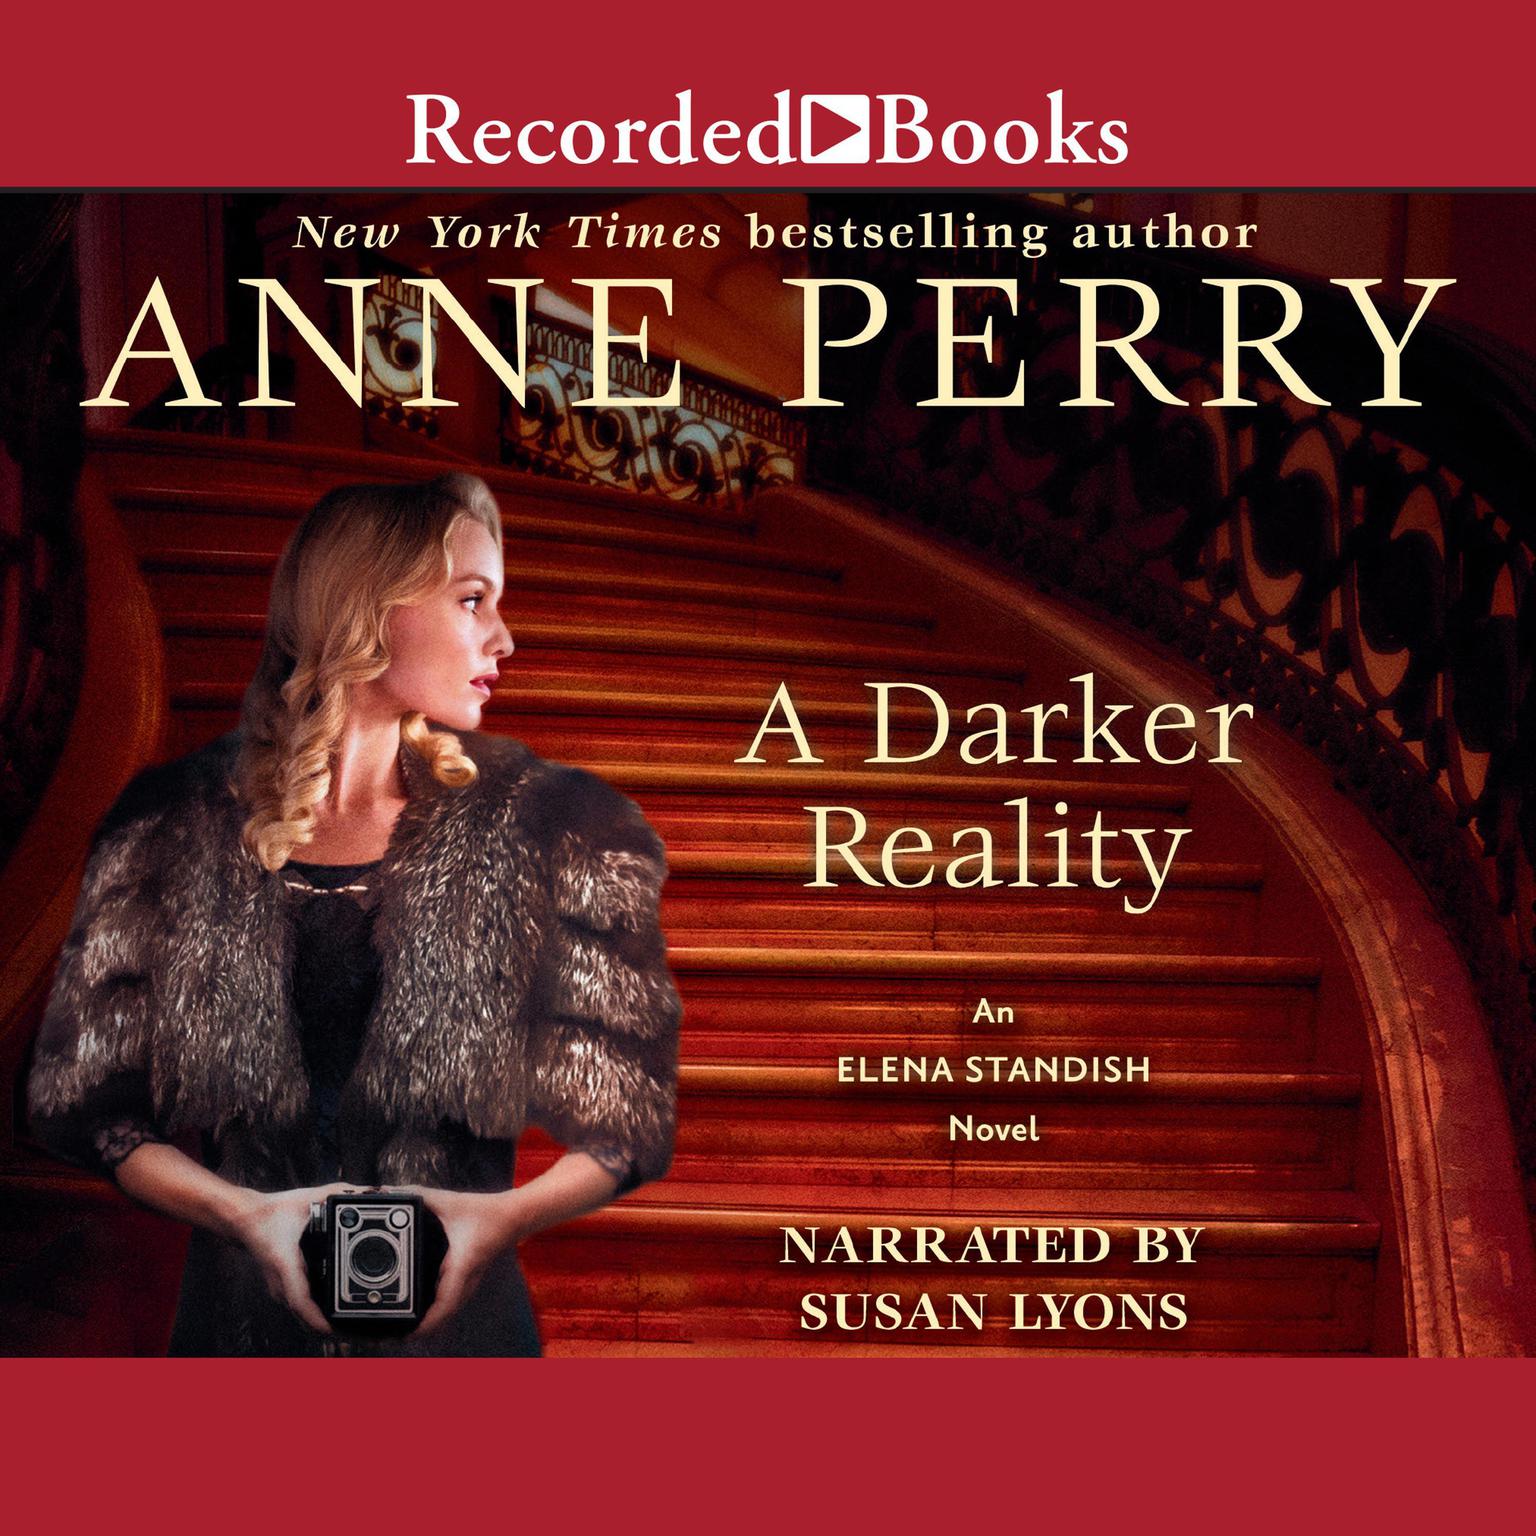 A Darker Reality: An Elena Standish Novel  Audiobook, by Anne Perry